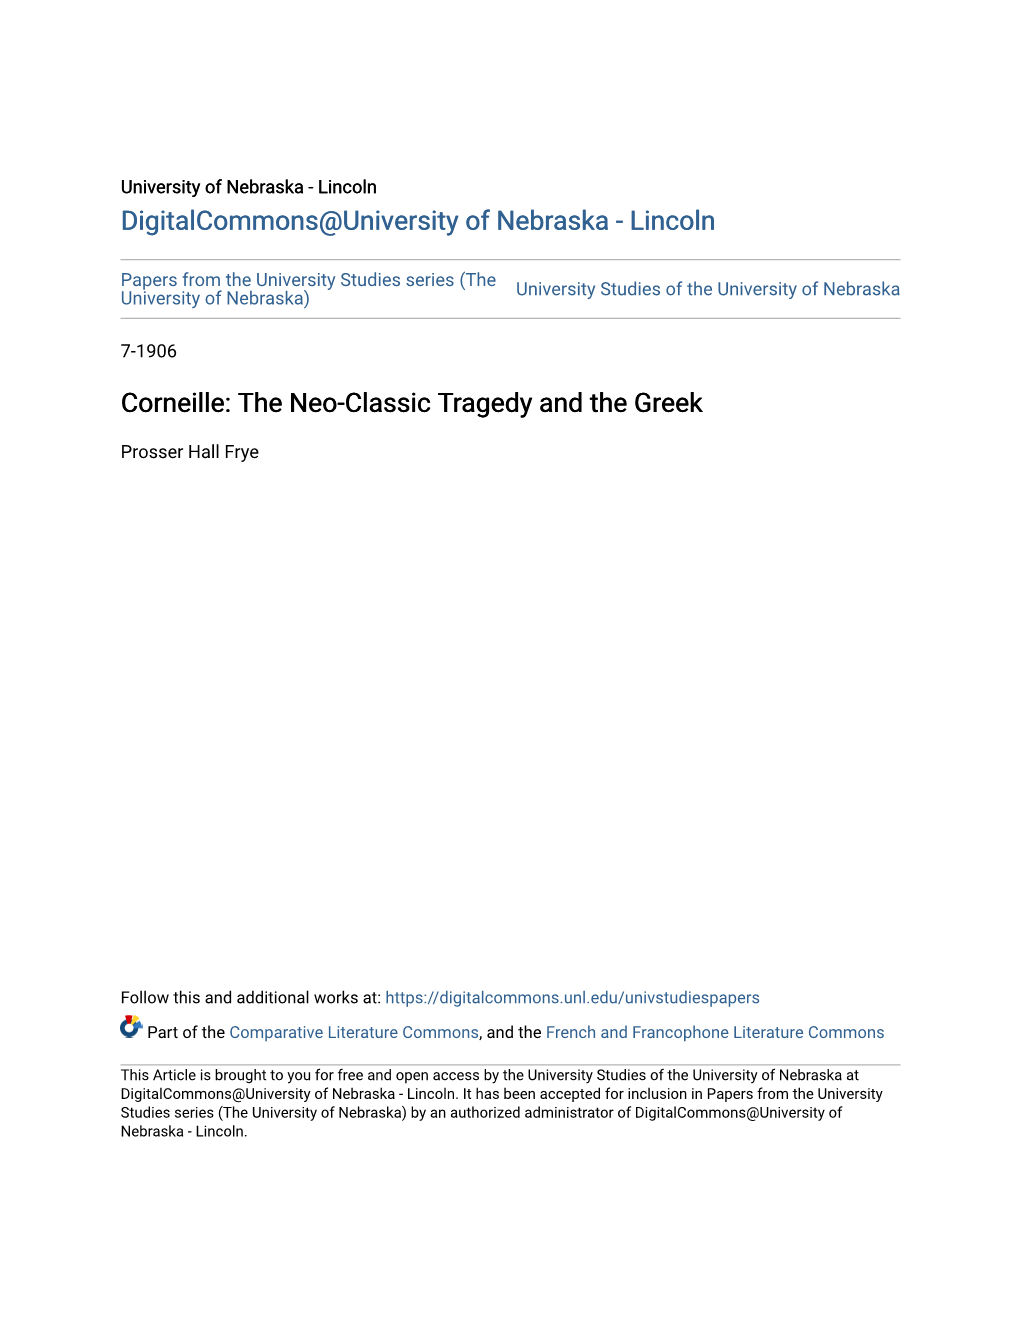 The Neo-Classic Tragedy and the Greek